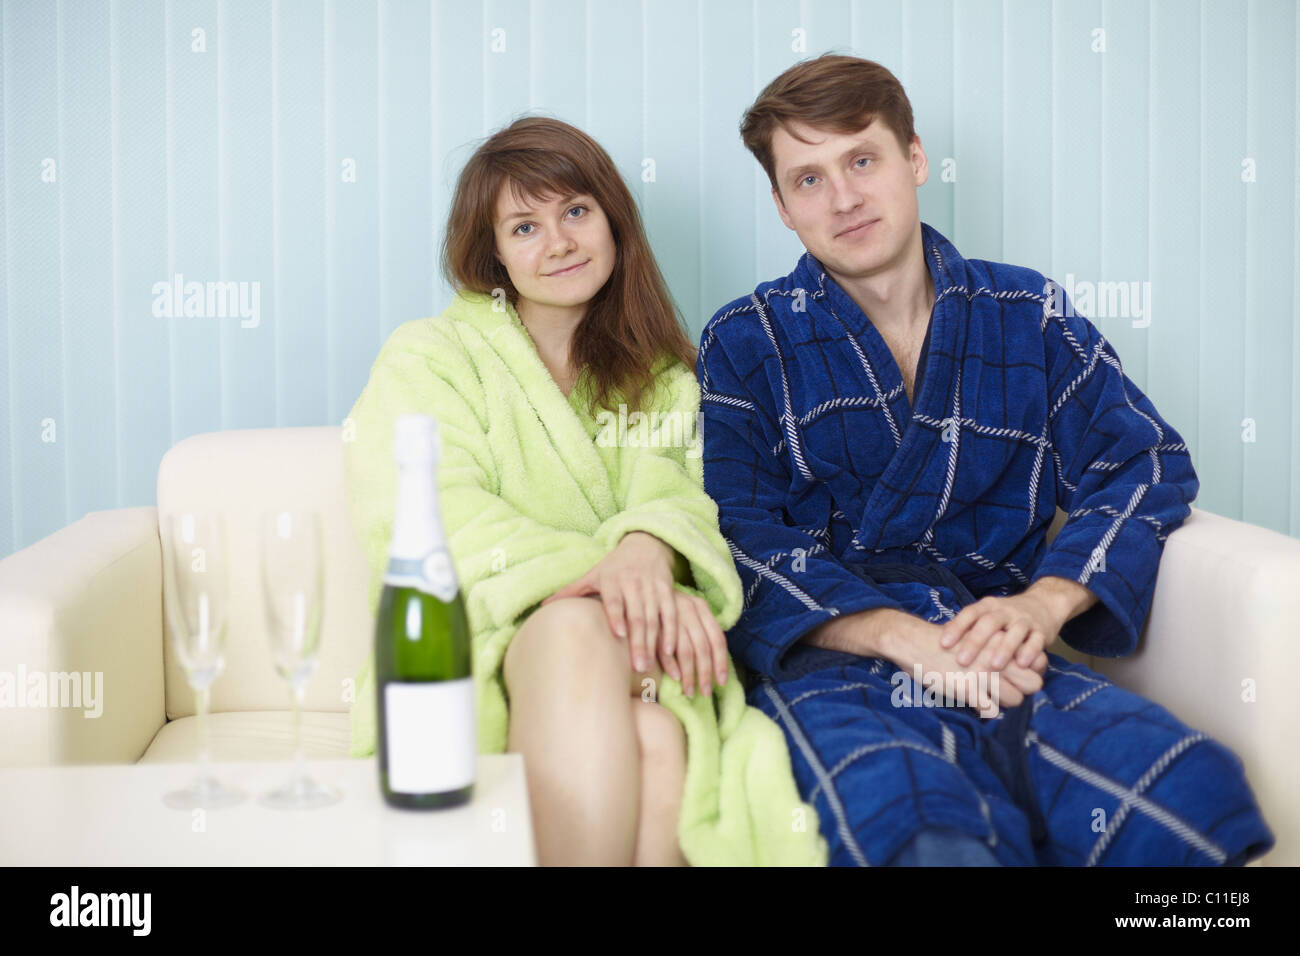 Young happy couple in dressing gowns Stock Photo